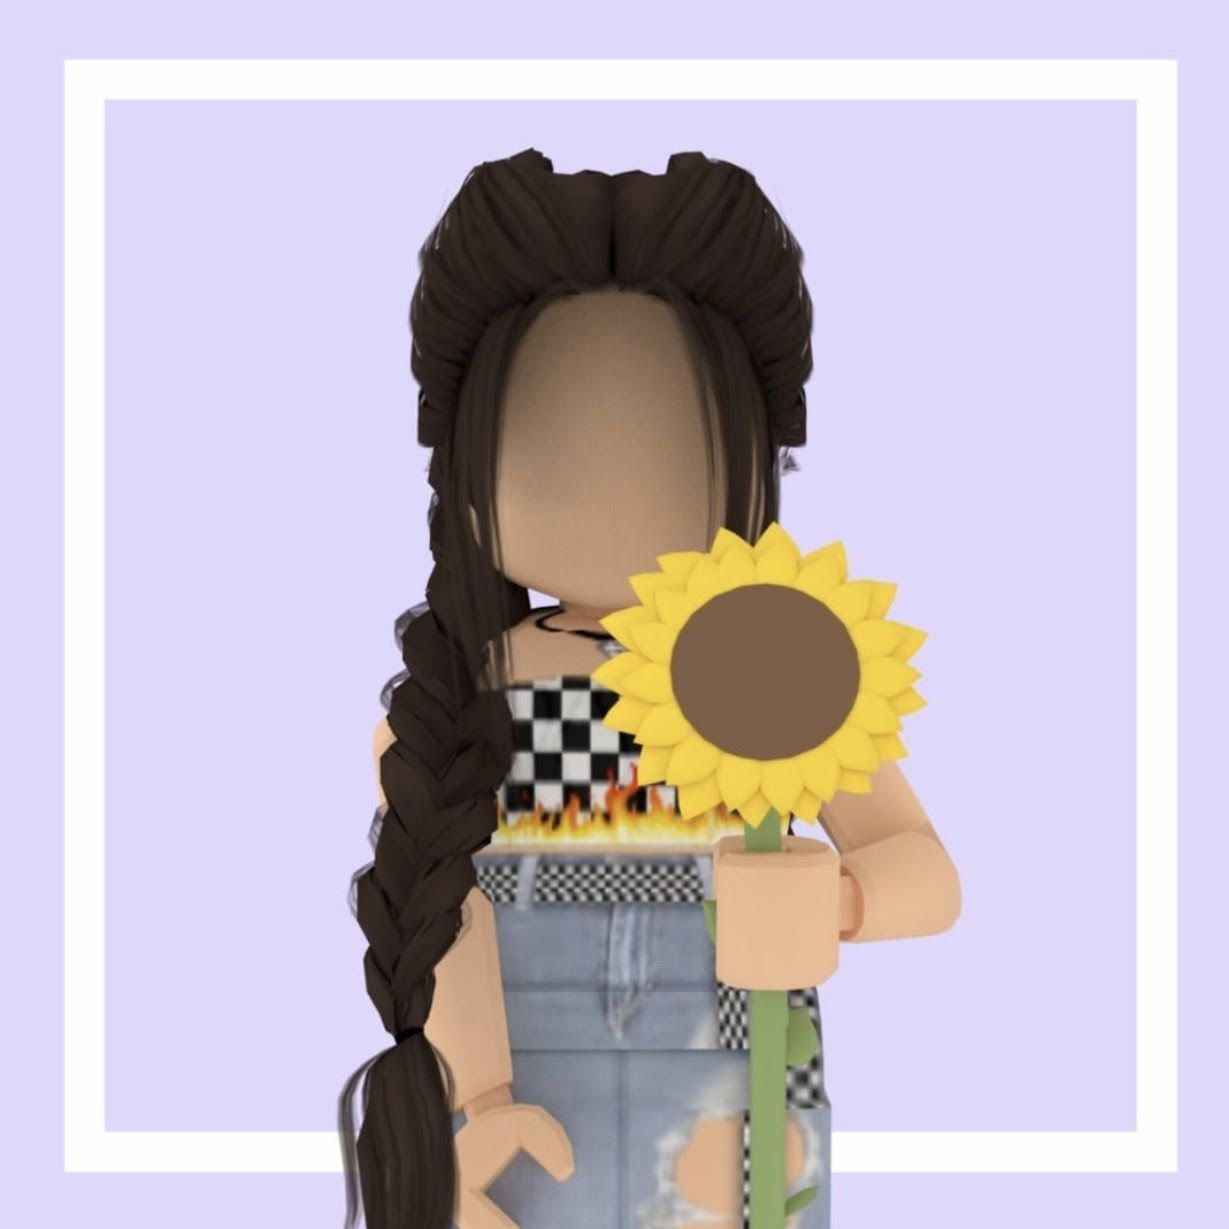 Cute Roblox GirlsWallpapers